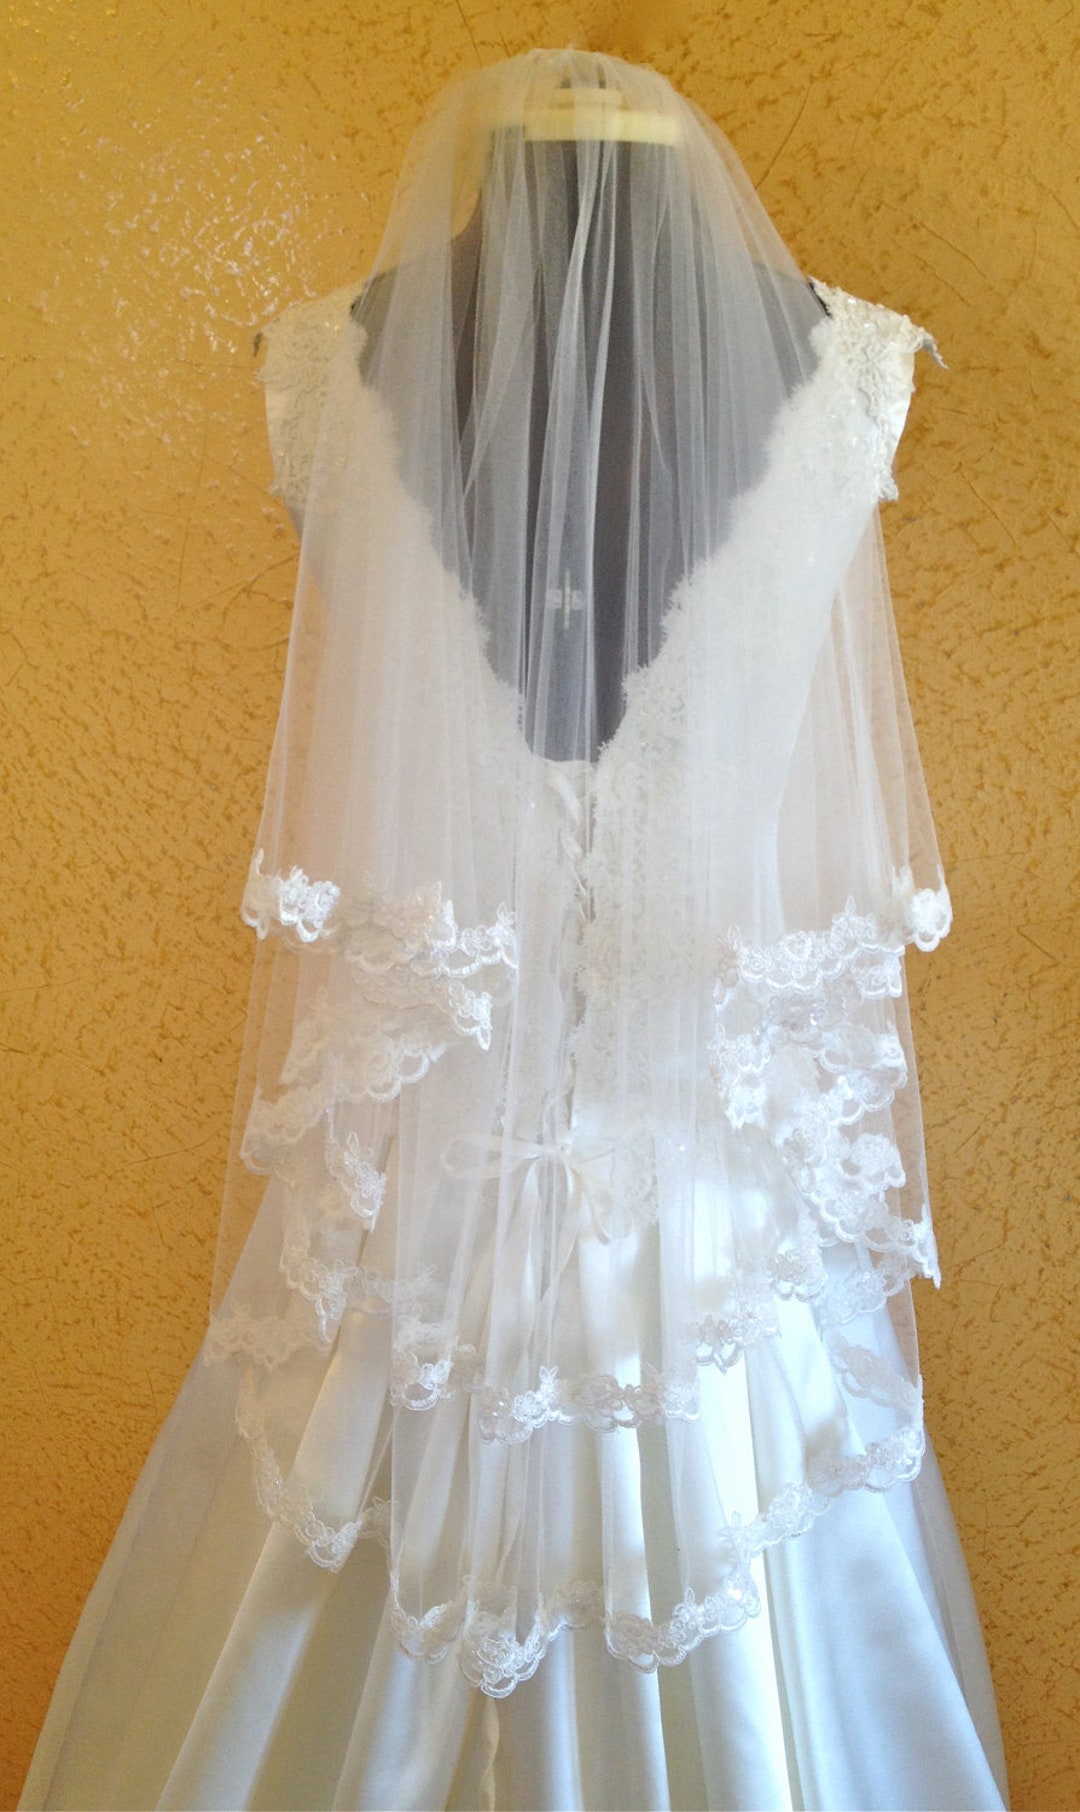 Lace Veil Wedding Veil in Two Tier Scalloped Beaded Lace - Etsy